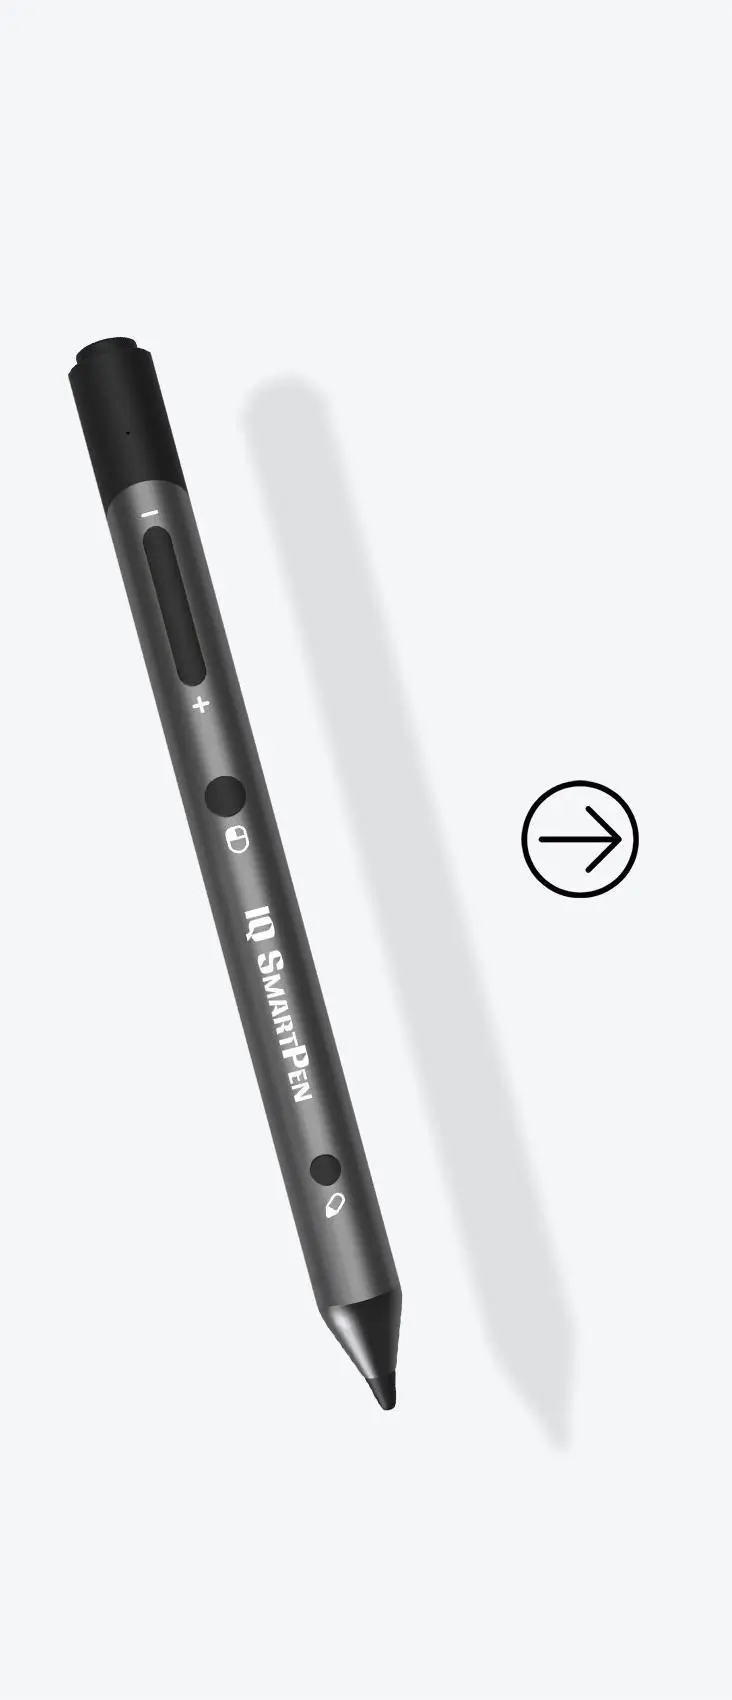 IQSmartPen is compatible in both Windows and Mac system